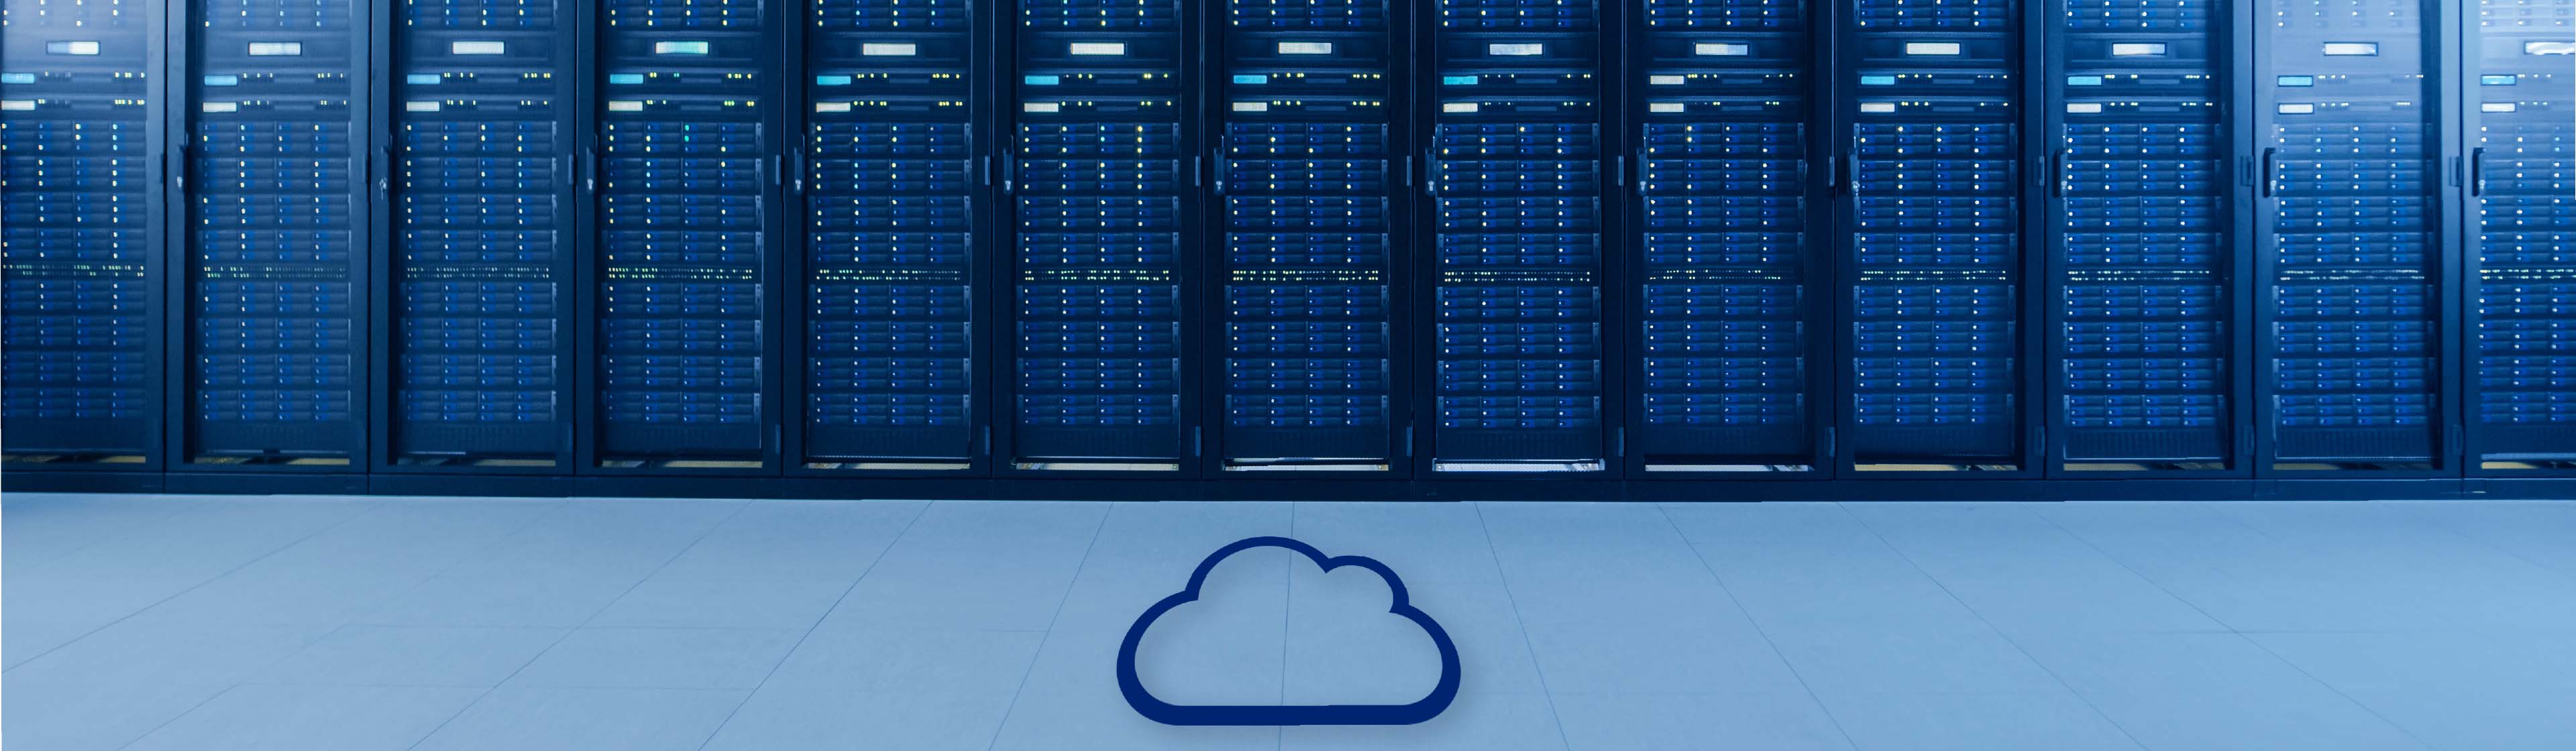 A cloud icon on the ground in front of a row of servers